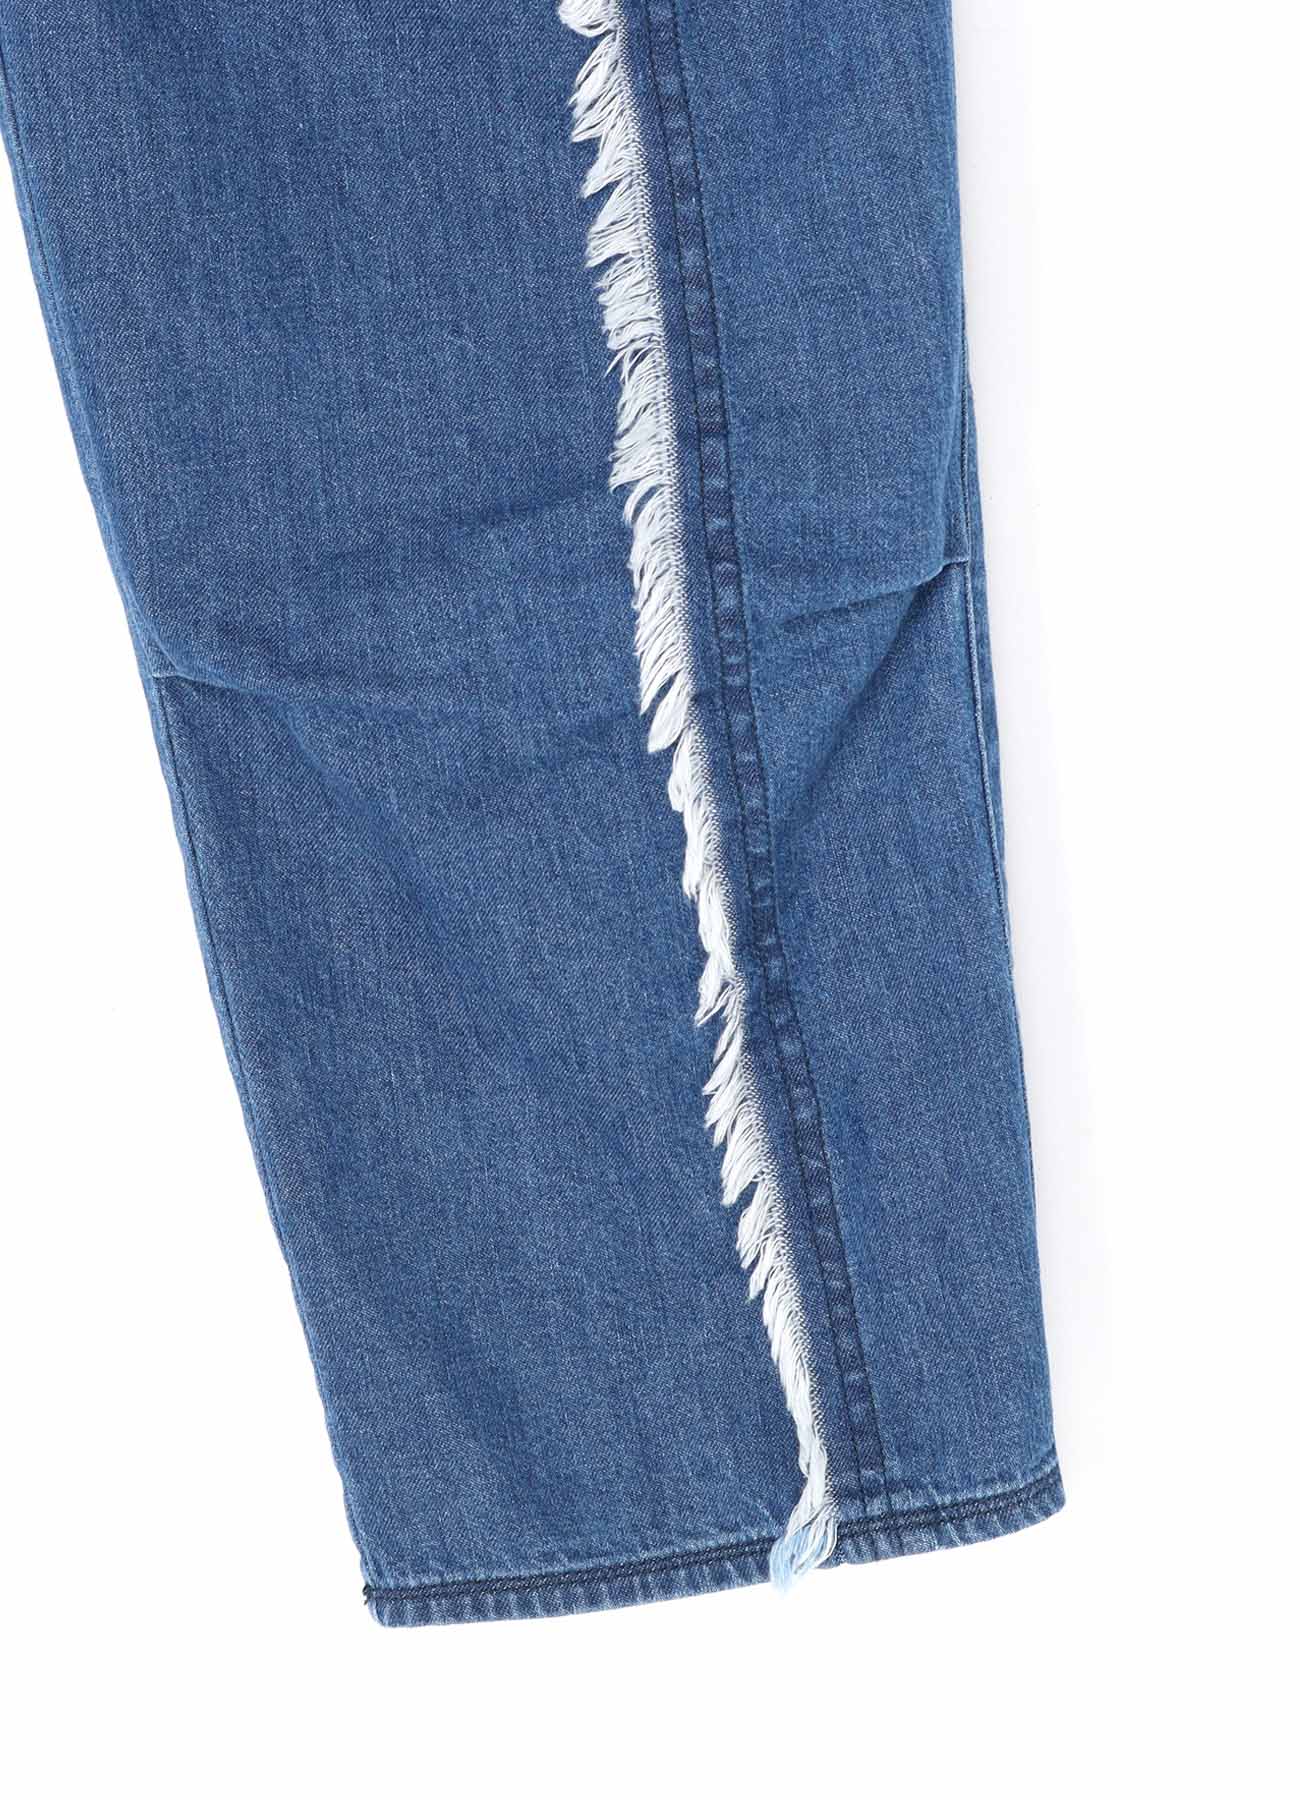 8OZ DENIM PANTS WITH RIPPED LINE DETAIL